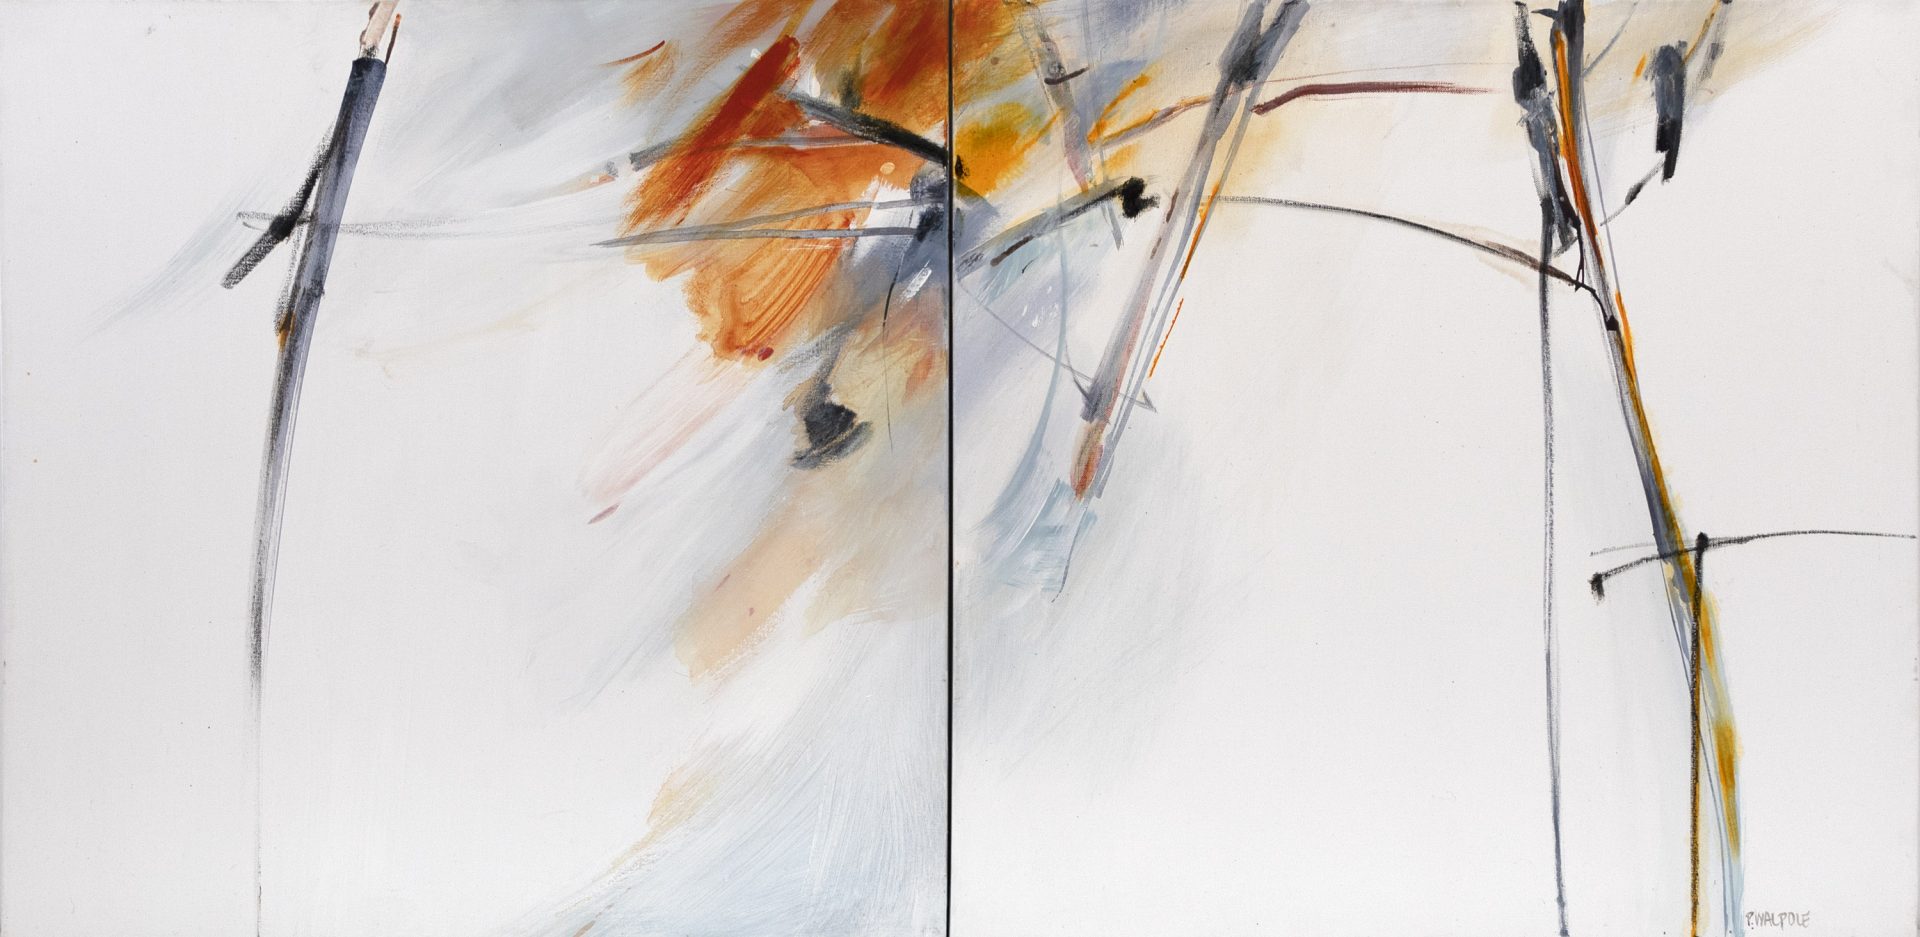 Embers | Pam Walpole | Mixed media on canvas | 76 x 152 cm diptych. | SOLD